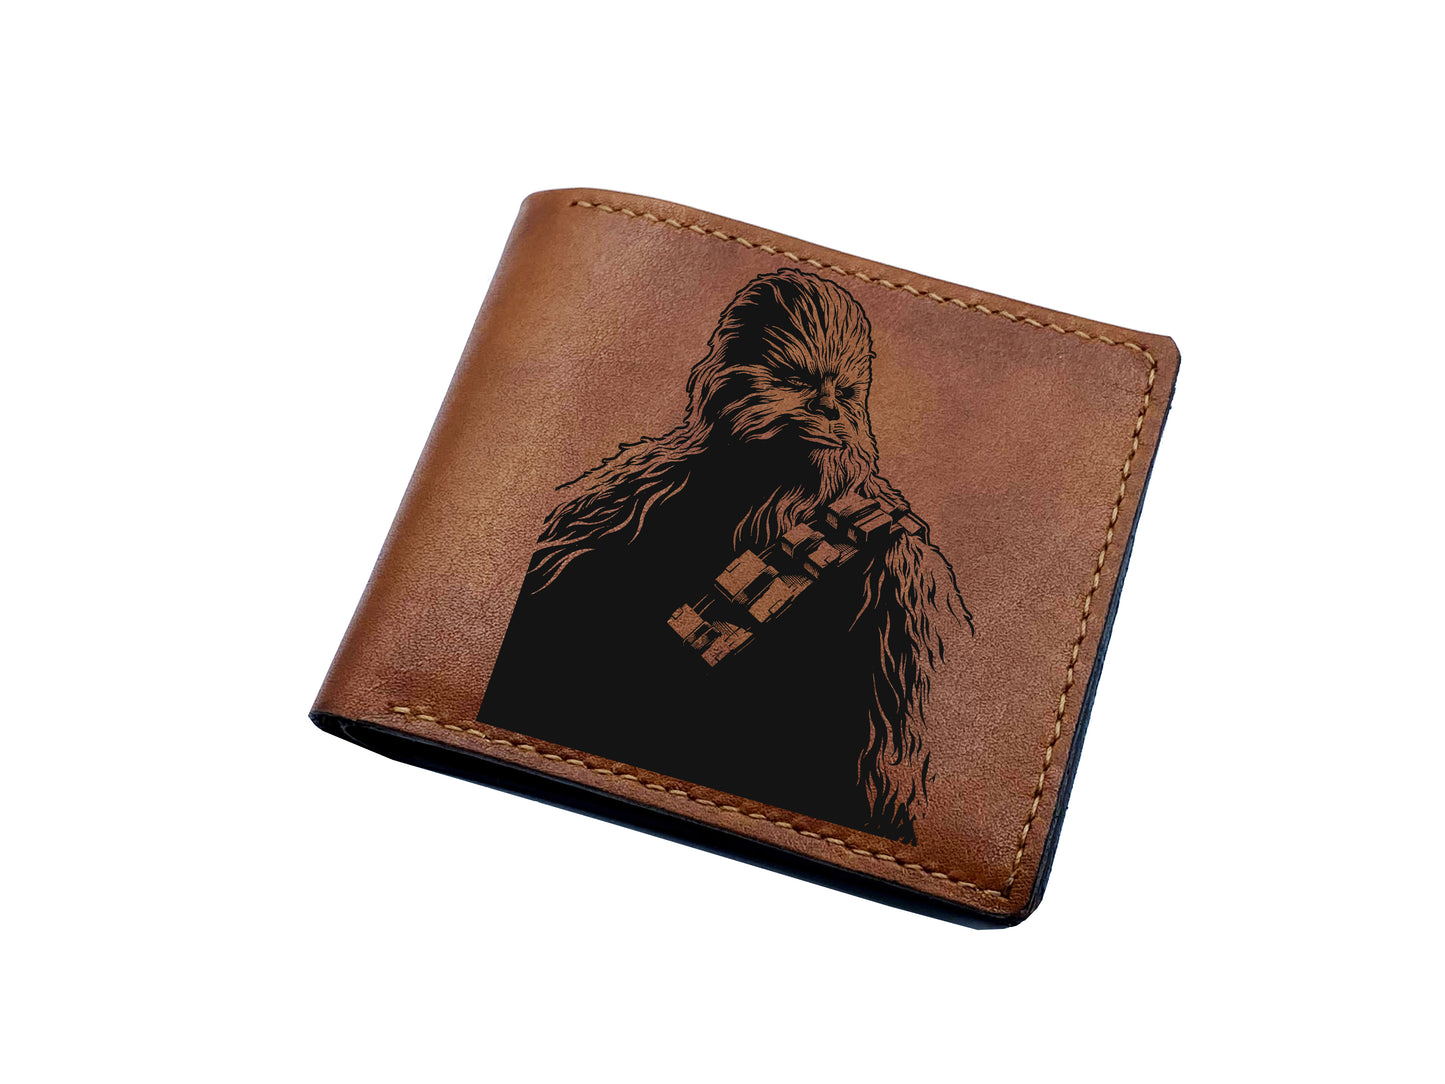 Starwars leather handmade men's wallet, leather gift ideas for men, christmas present for dad, starwars fan art gifts